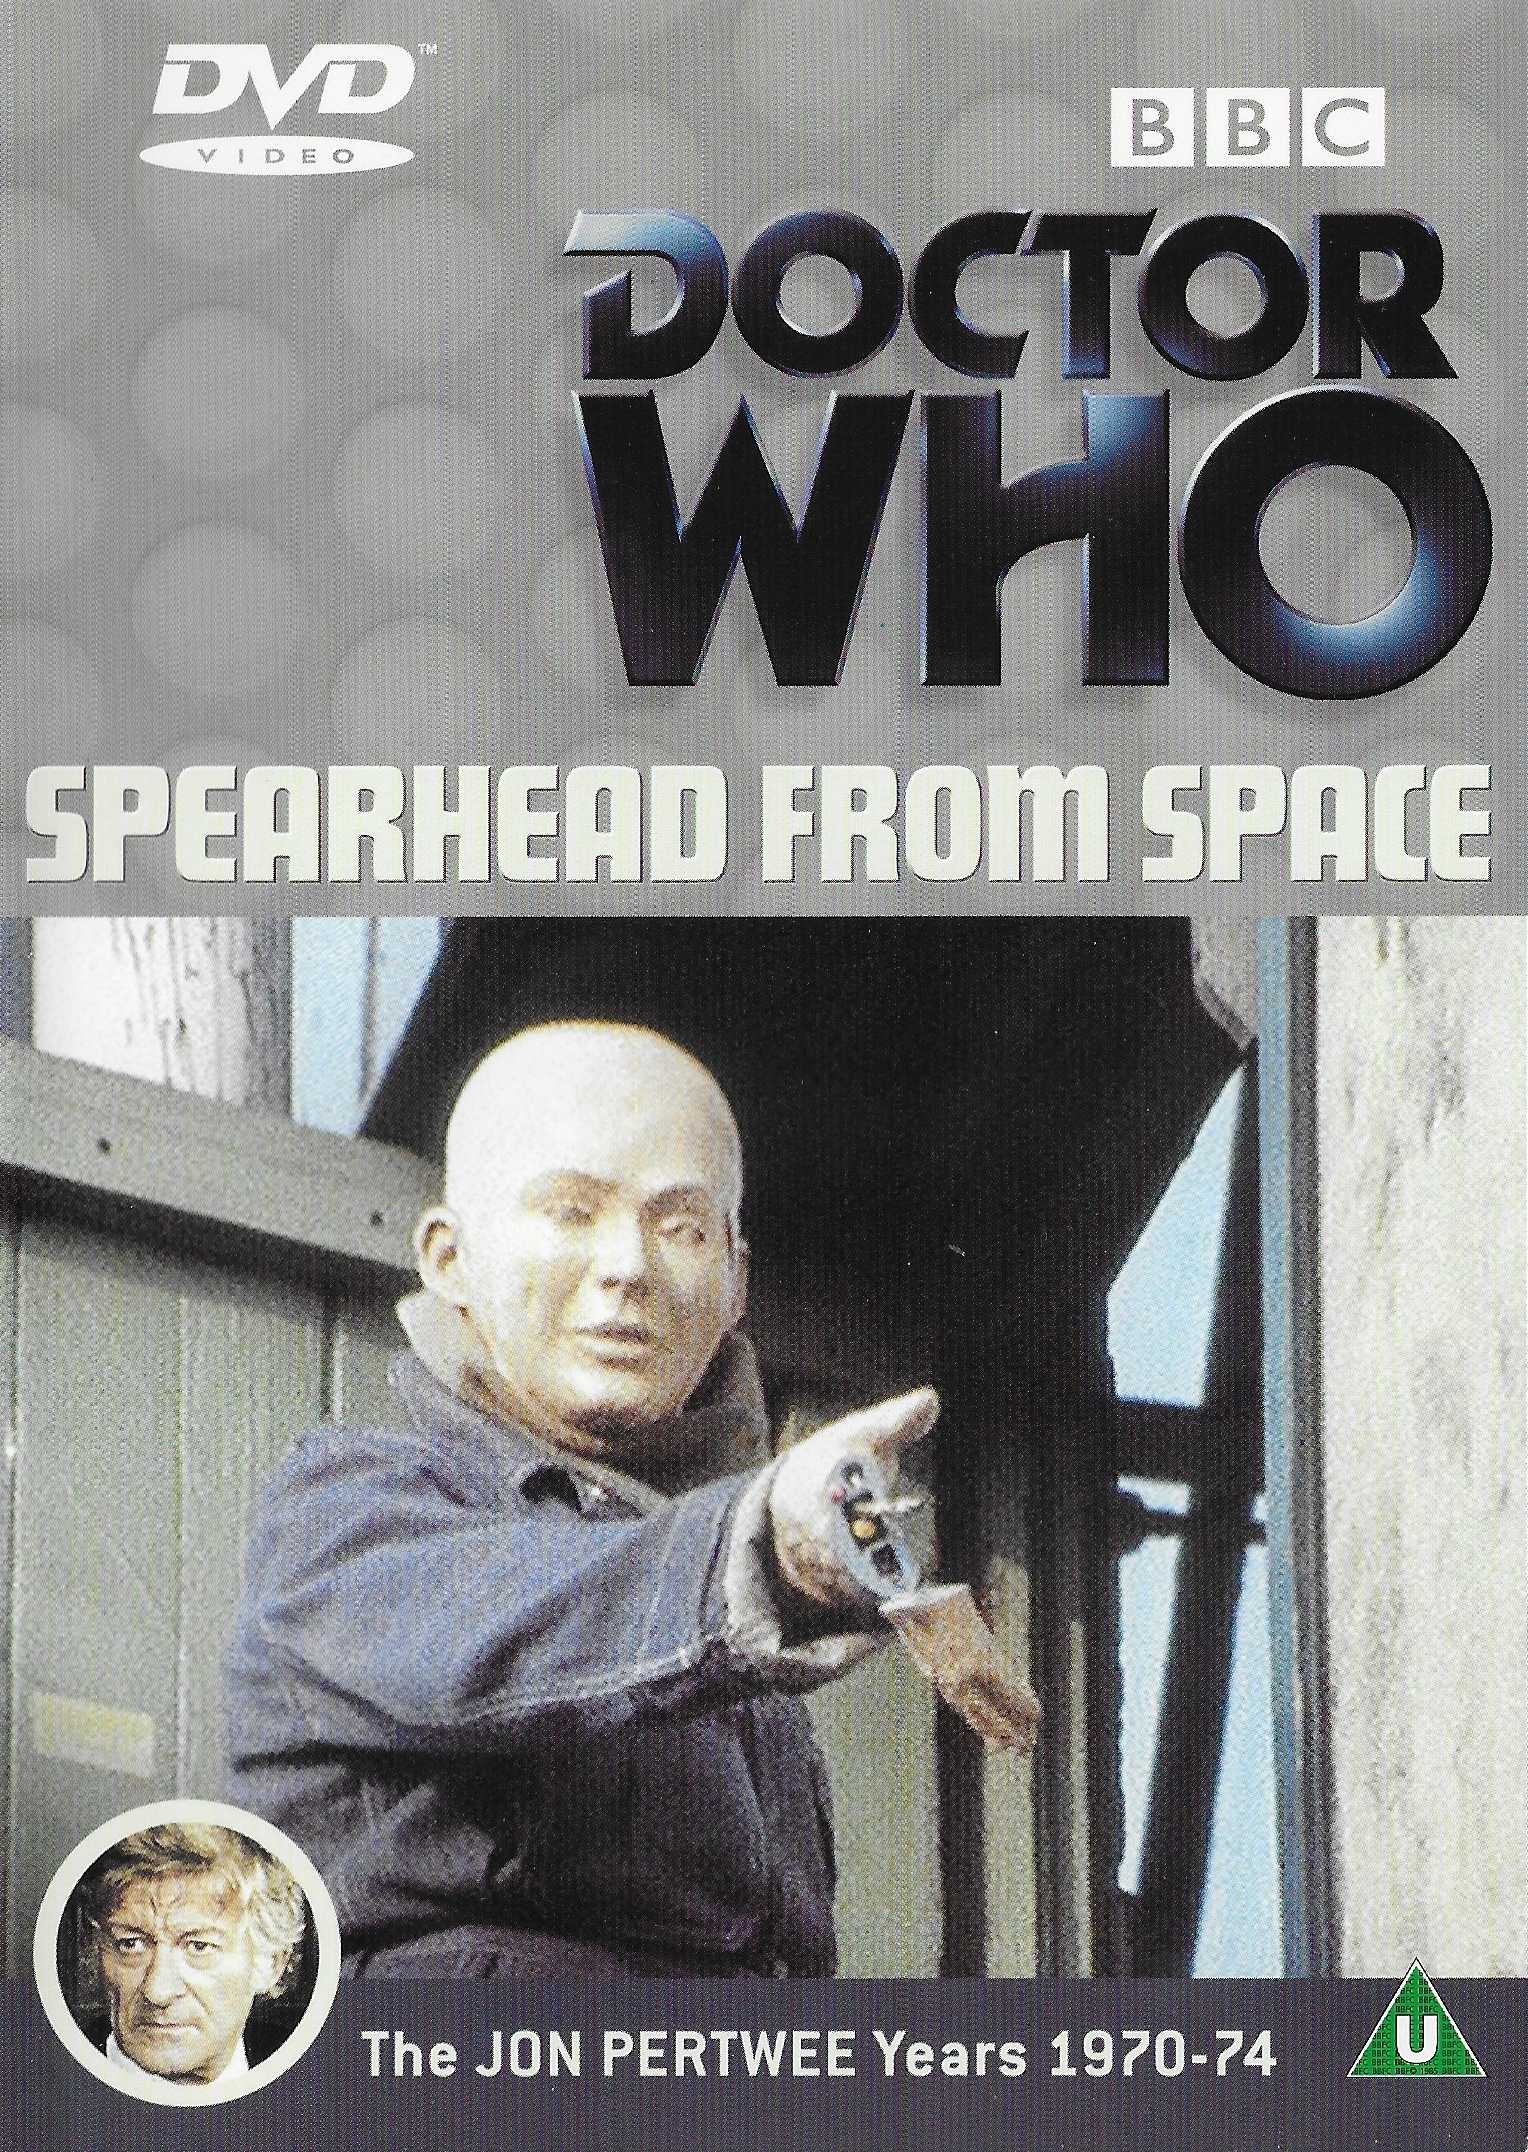 Picture of BBCDVD 1033 Doctor Who - Spearhead from space by artist Robert Holmes from the BBC records and Tapes library